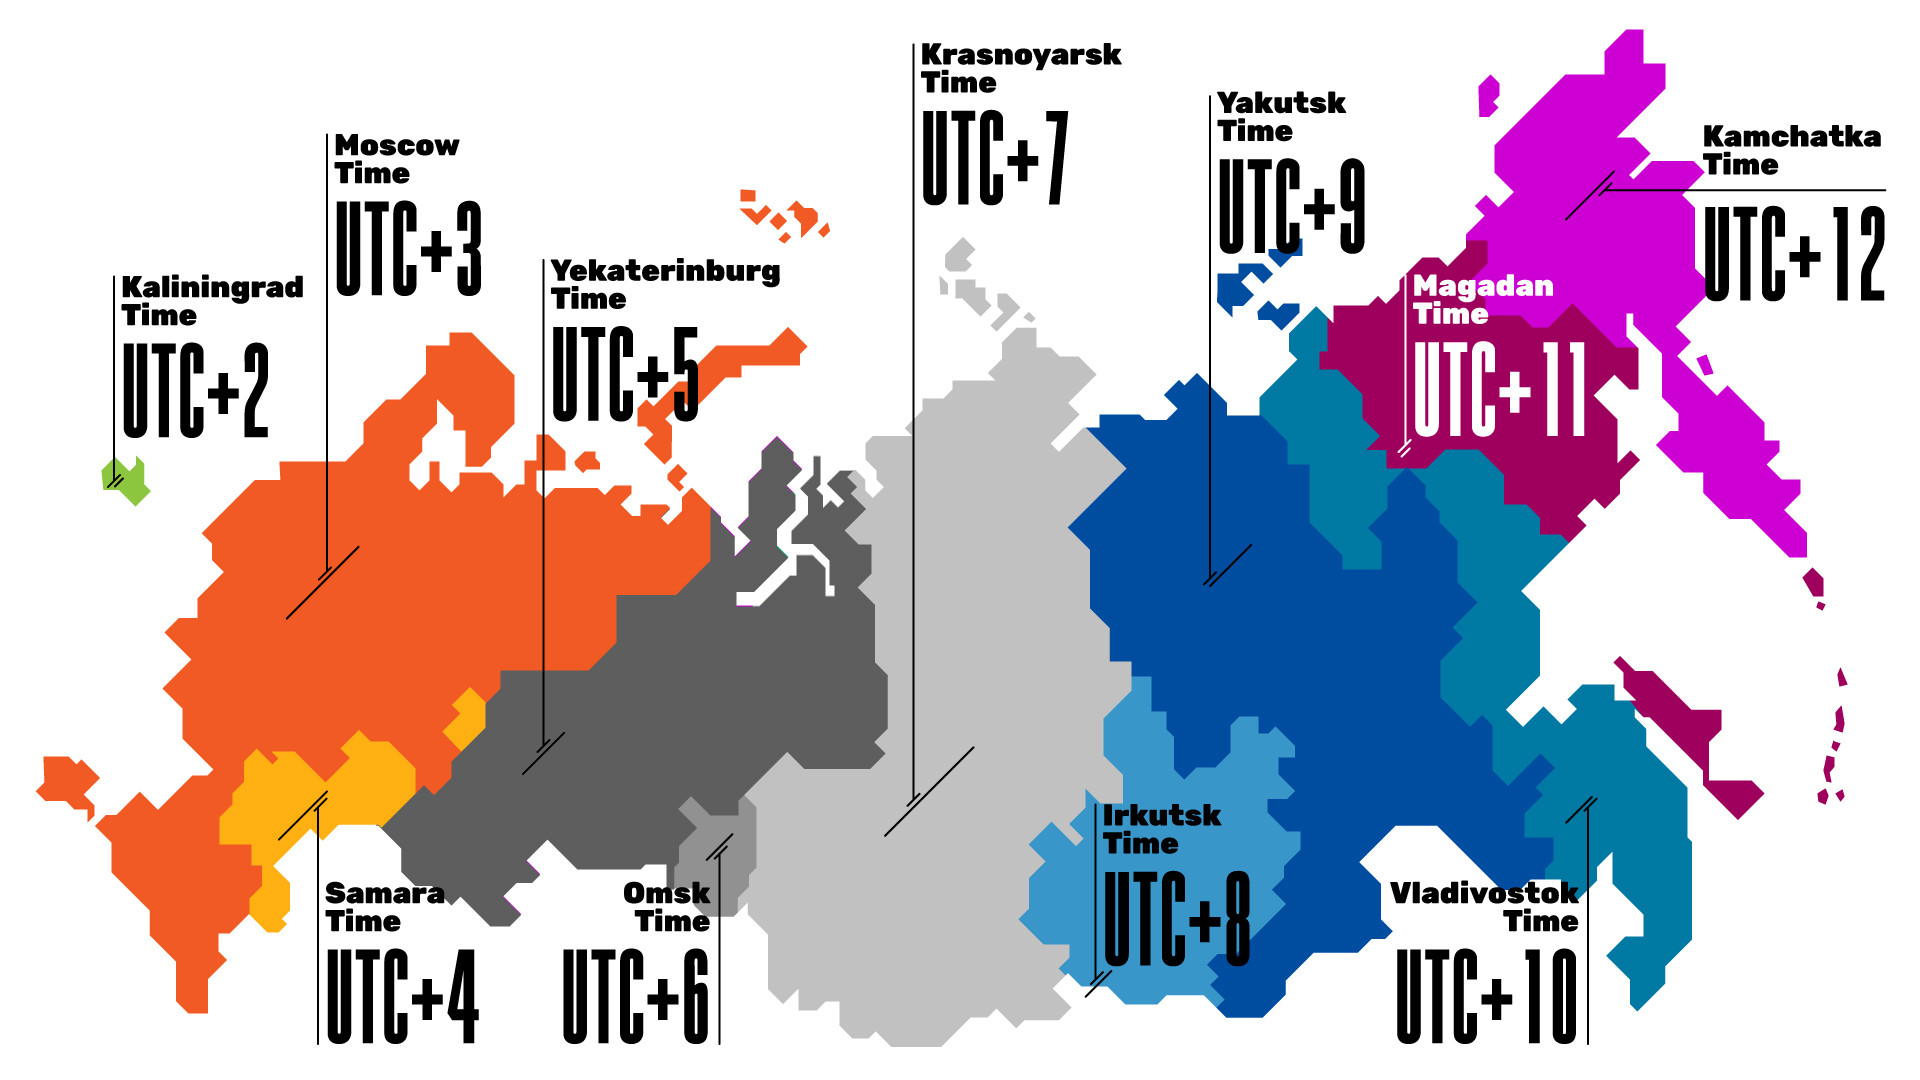 1920x1080 How many time zones are there in Russia? Russia Beyond